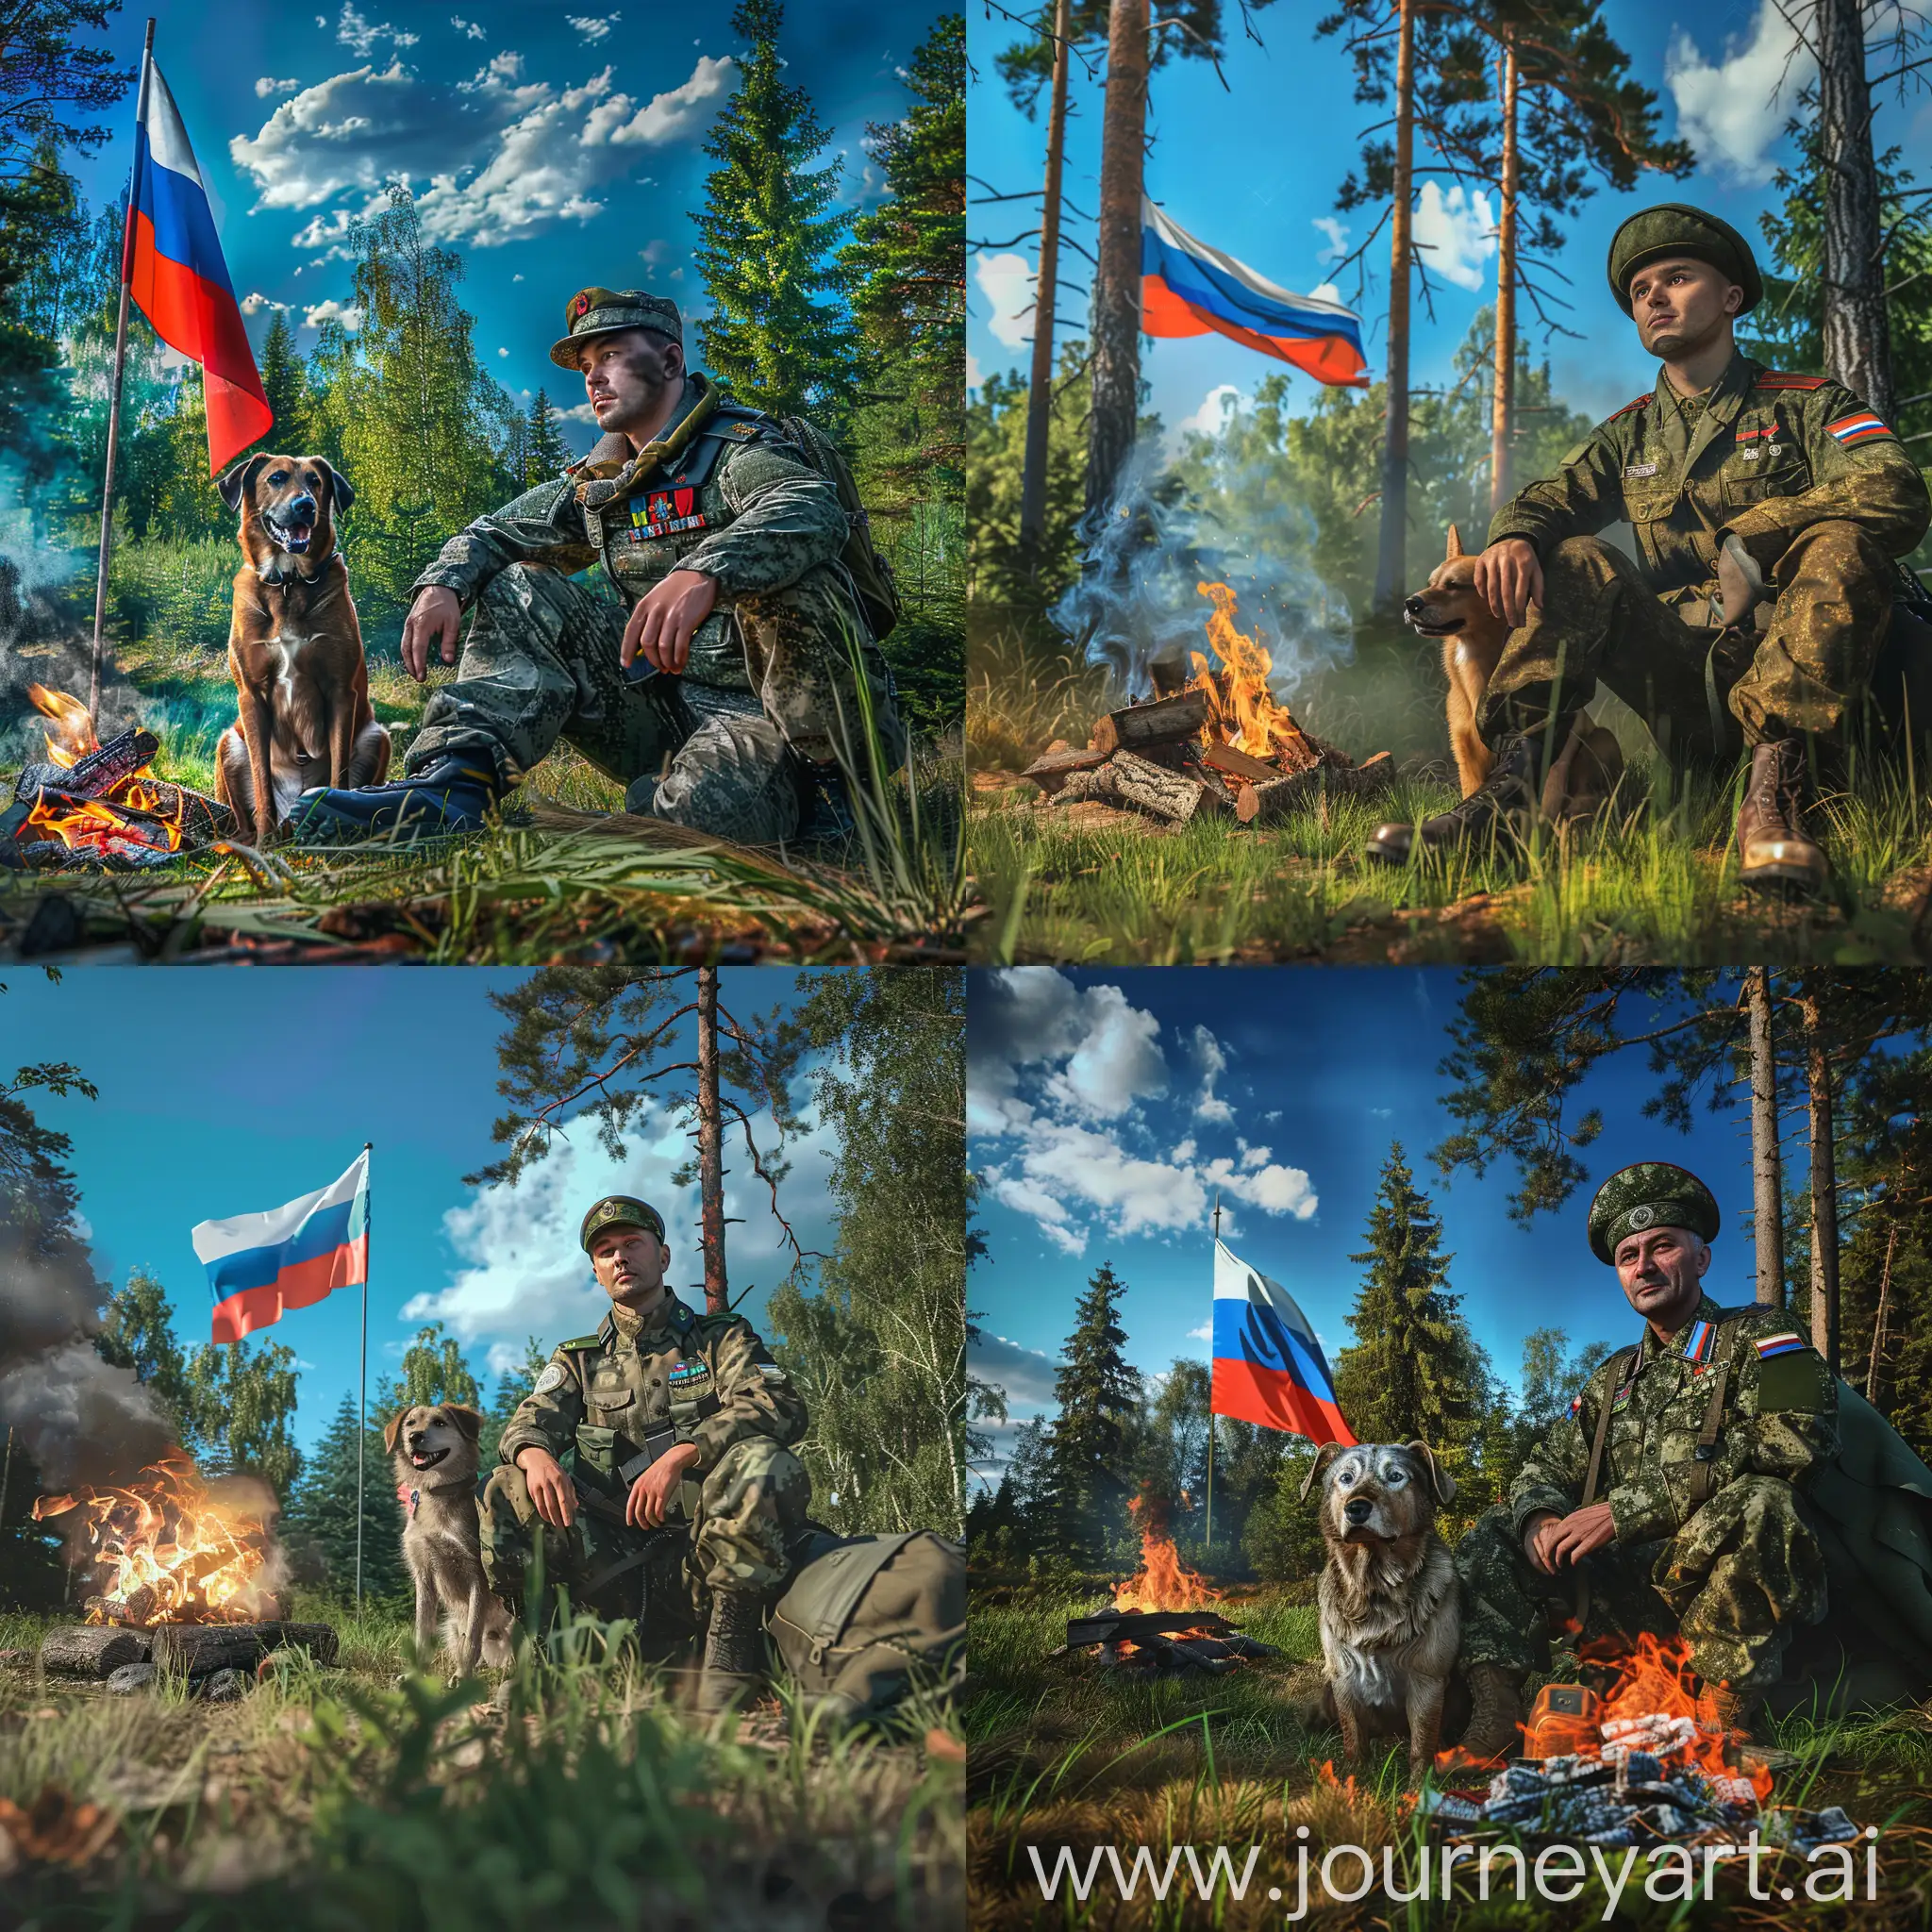 Russian-Military-Officer-Relaxing-with-Companion-Dog-in-Serene-Forest-Setting